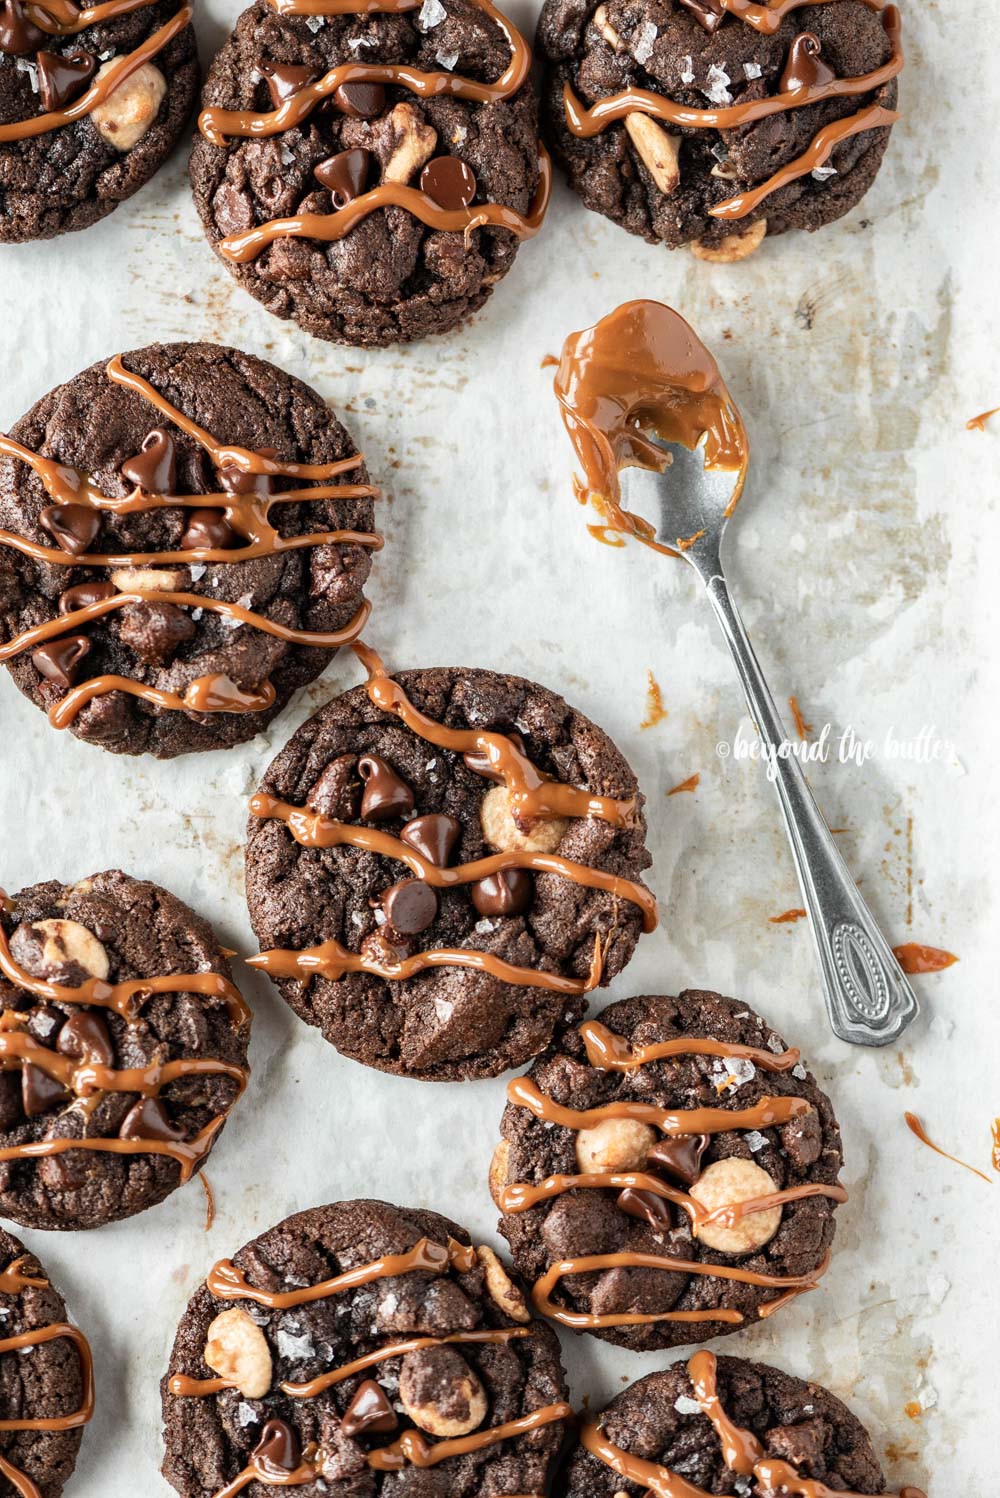 Overhead image of just baked double chocolate salted caramel cookies on a baking sheet with spoon dipped in a caramel sauce resting close by | All Images © Beyond the Butter™